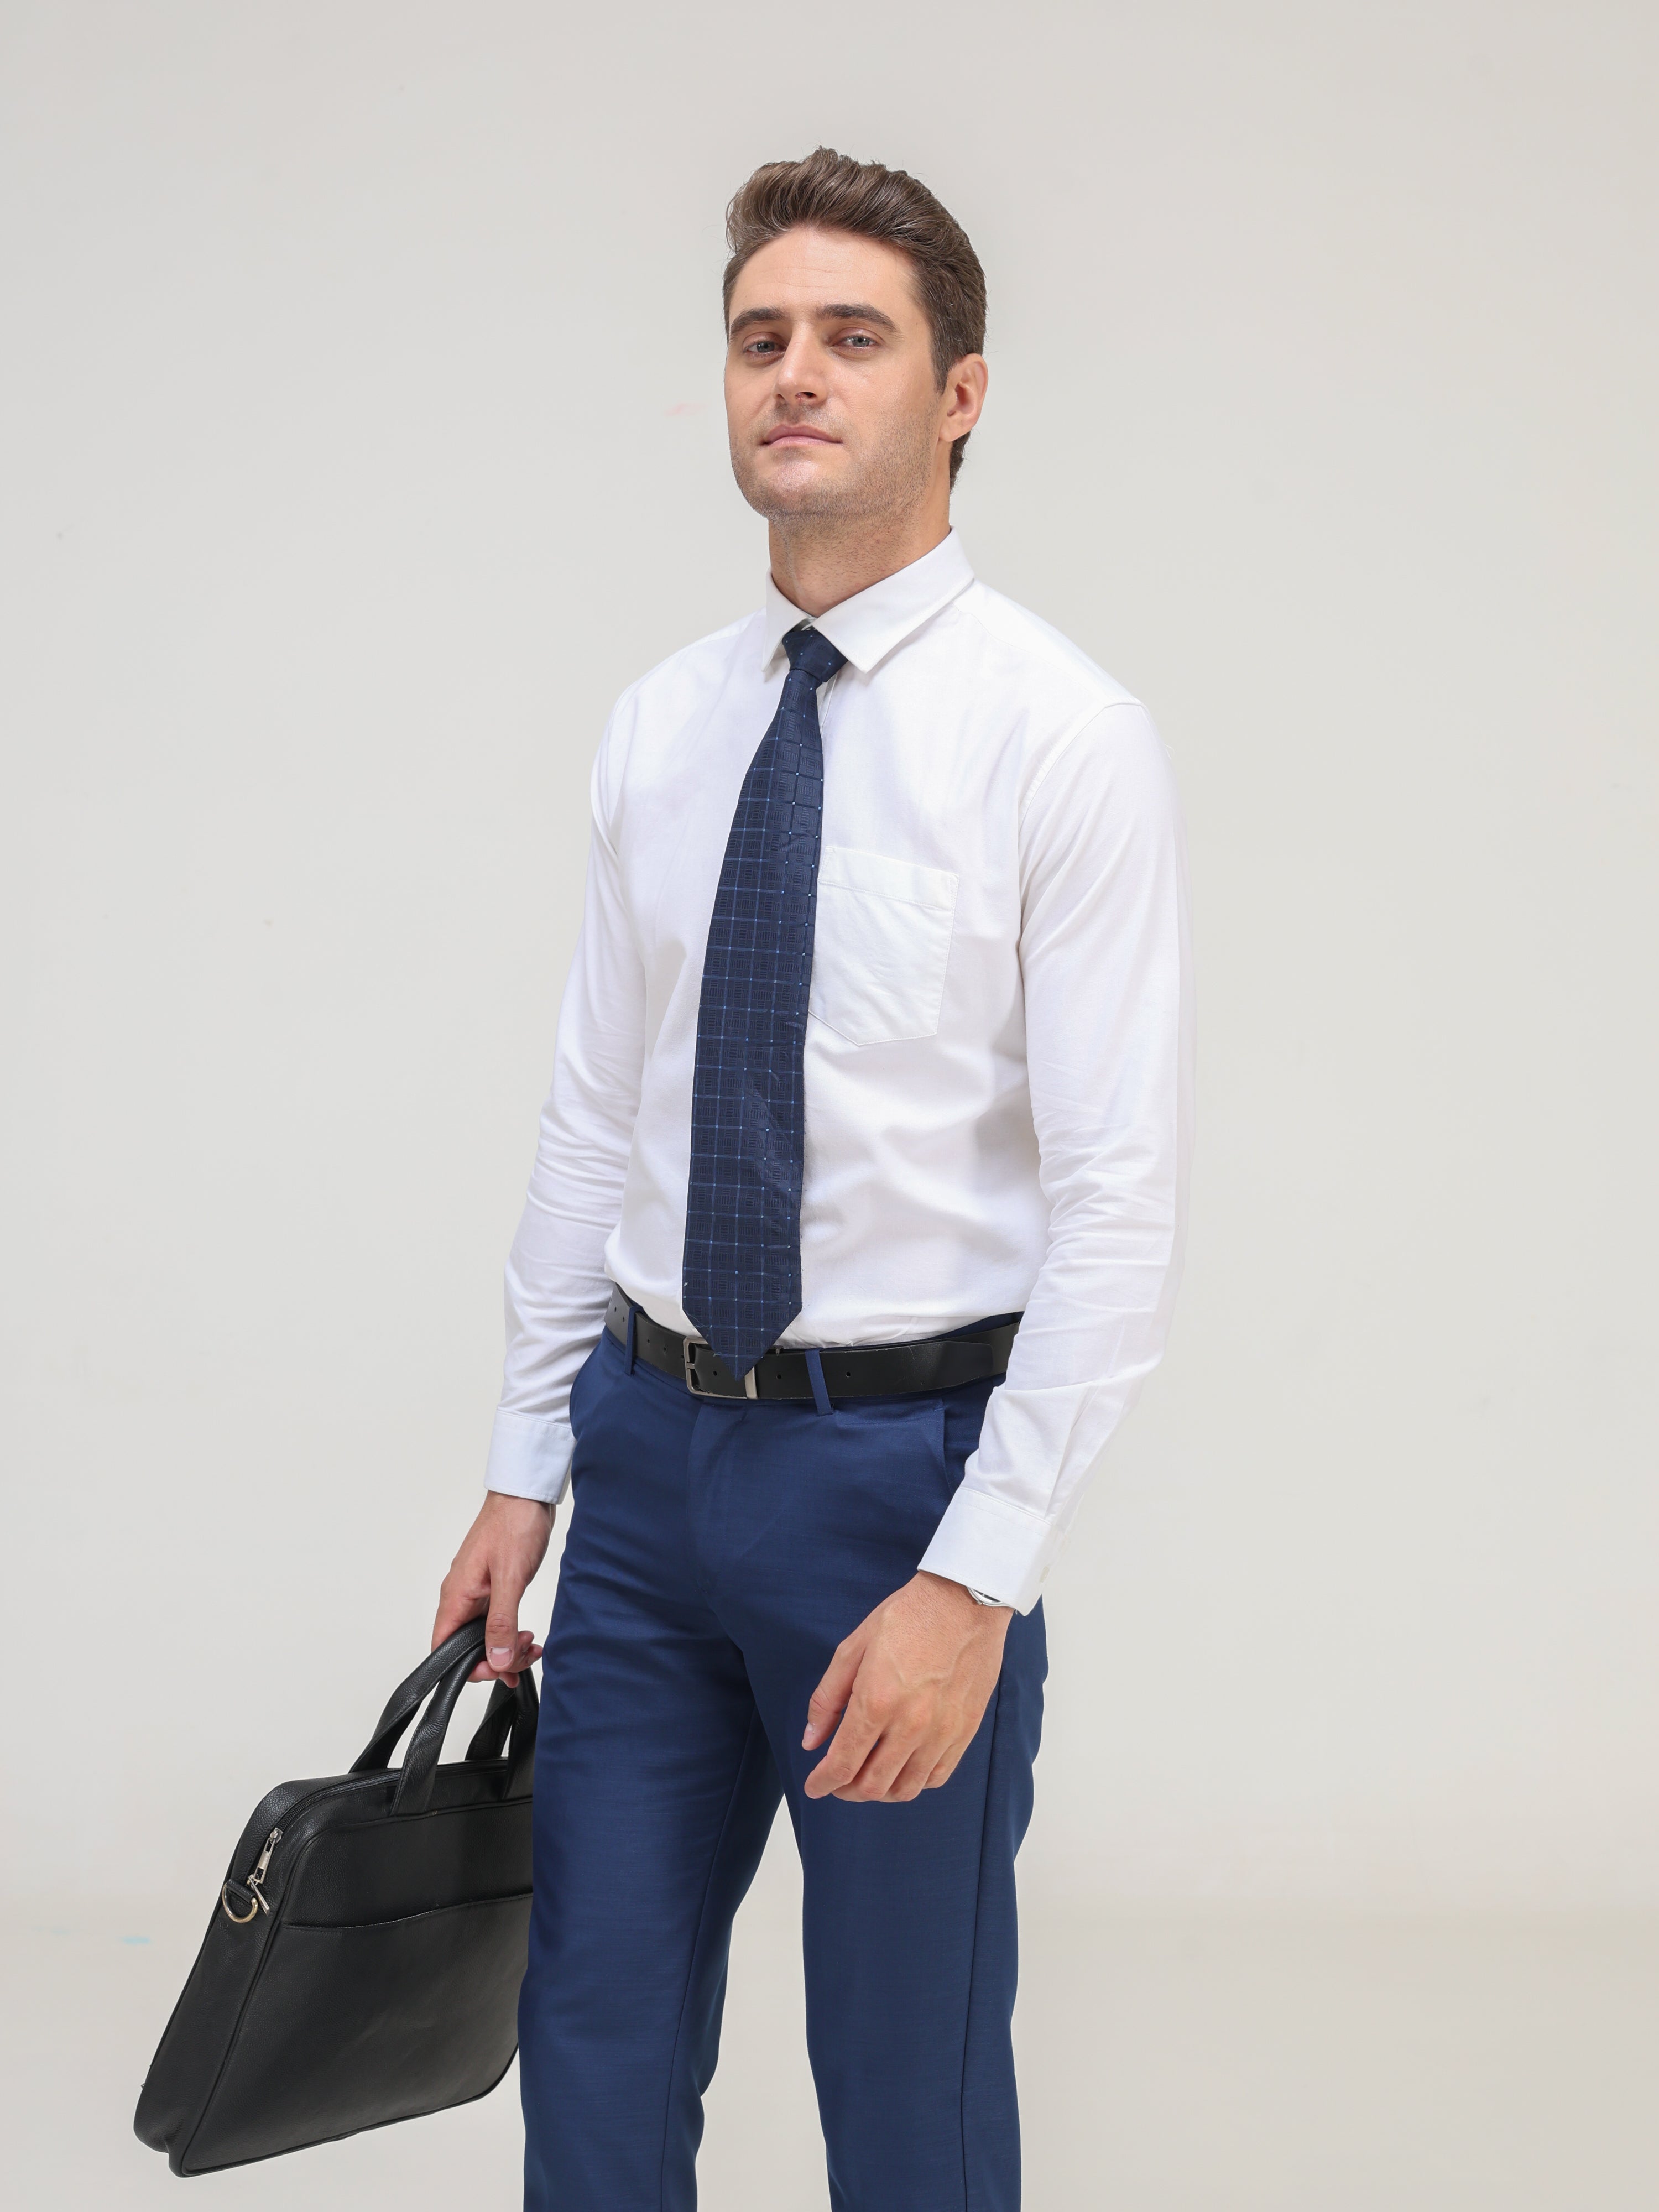 Man wearing Moonlite White Oxford Turms shirt, paired with blue trousers and a tie, carrying a black briefcase - best shirts for men.